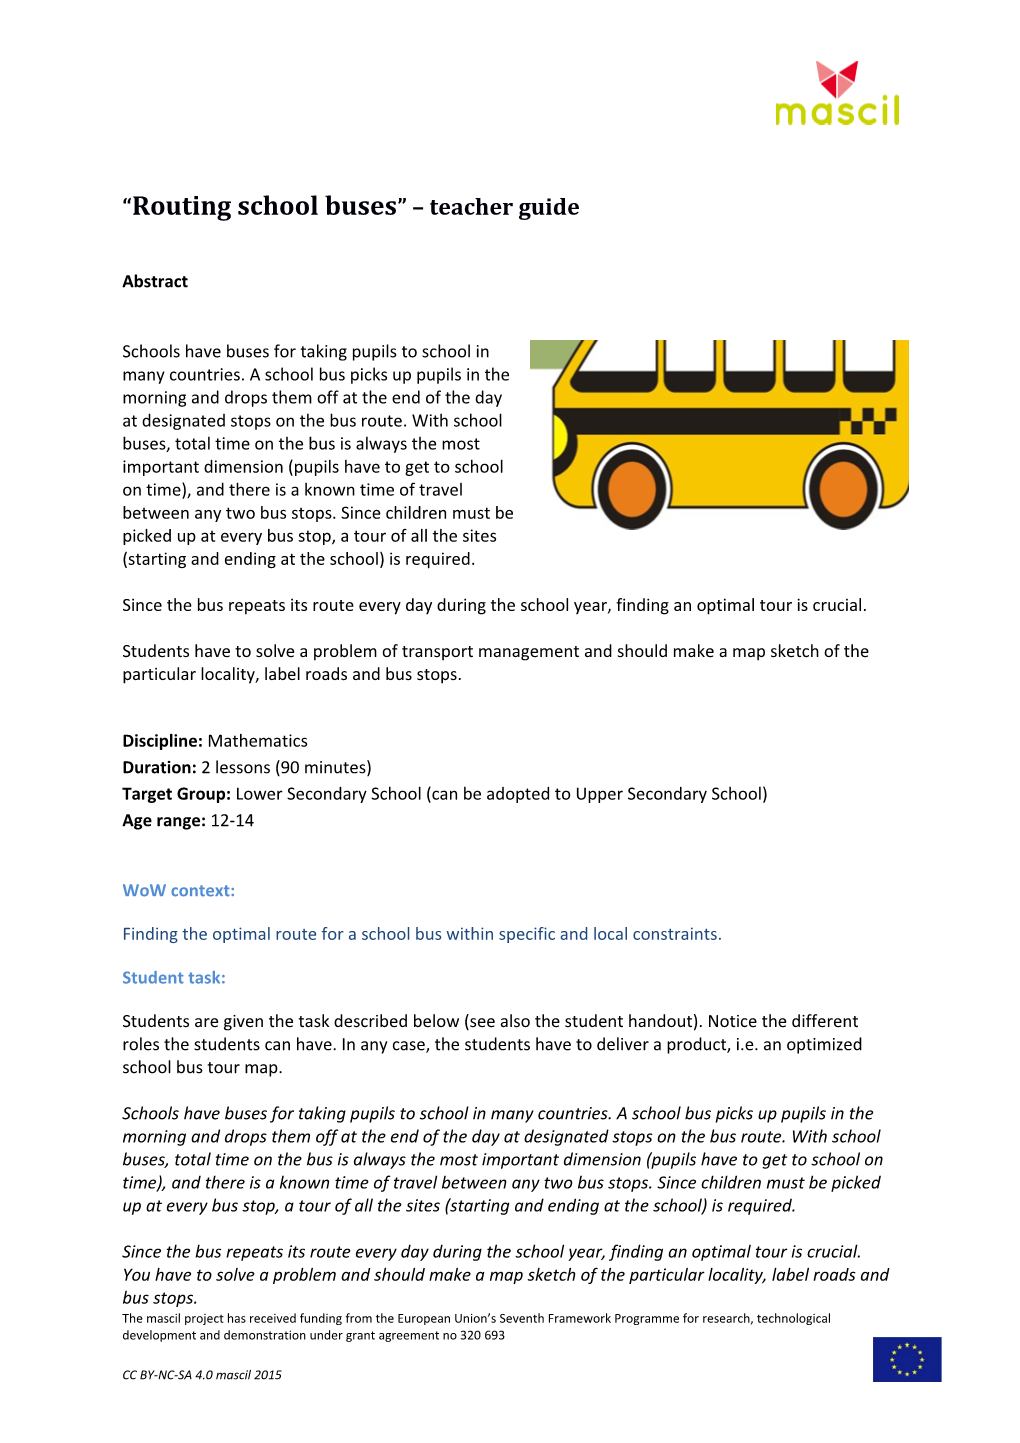 Routing School Buses Teacher Guide